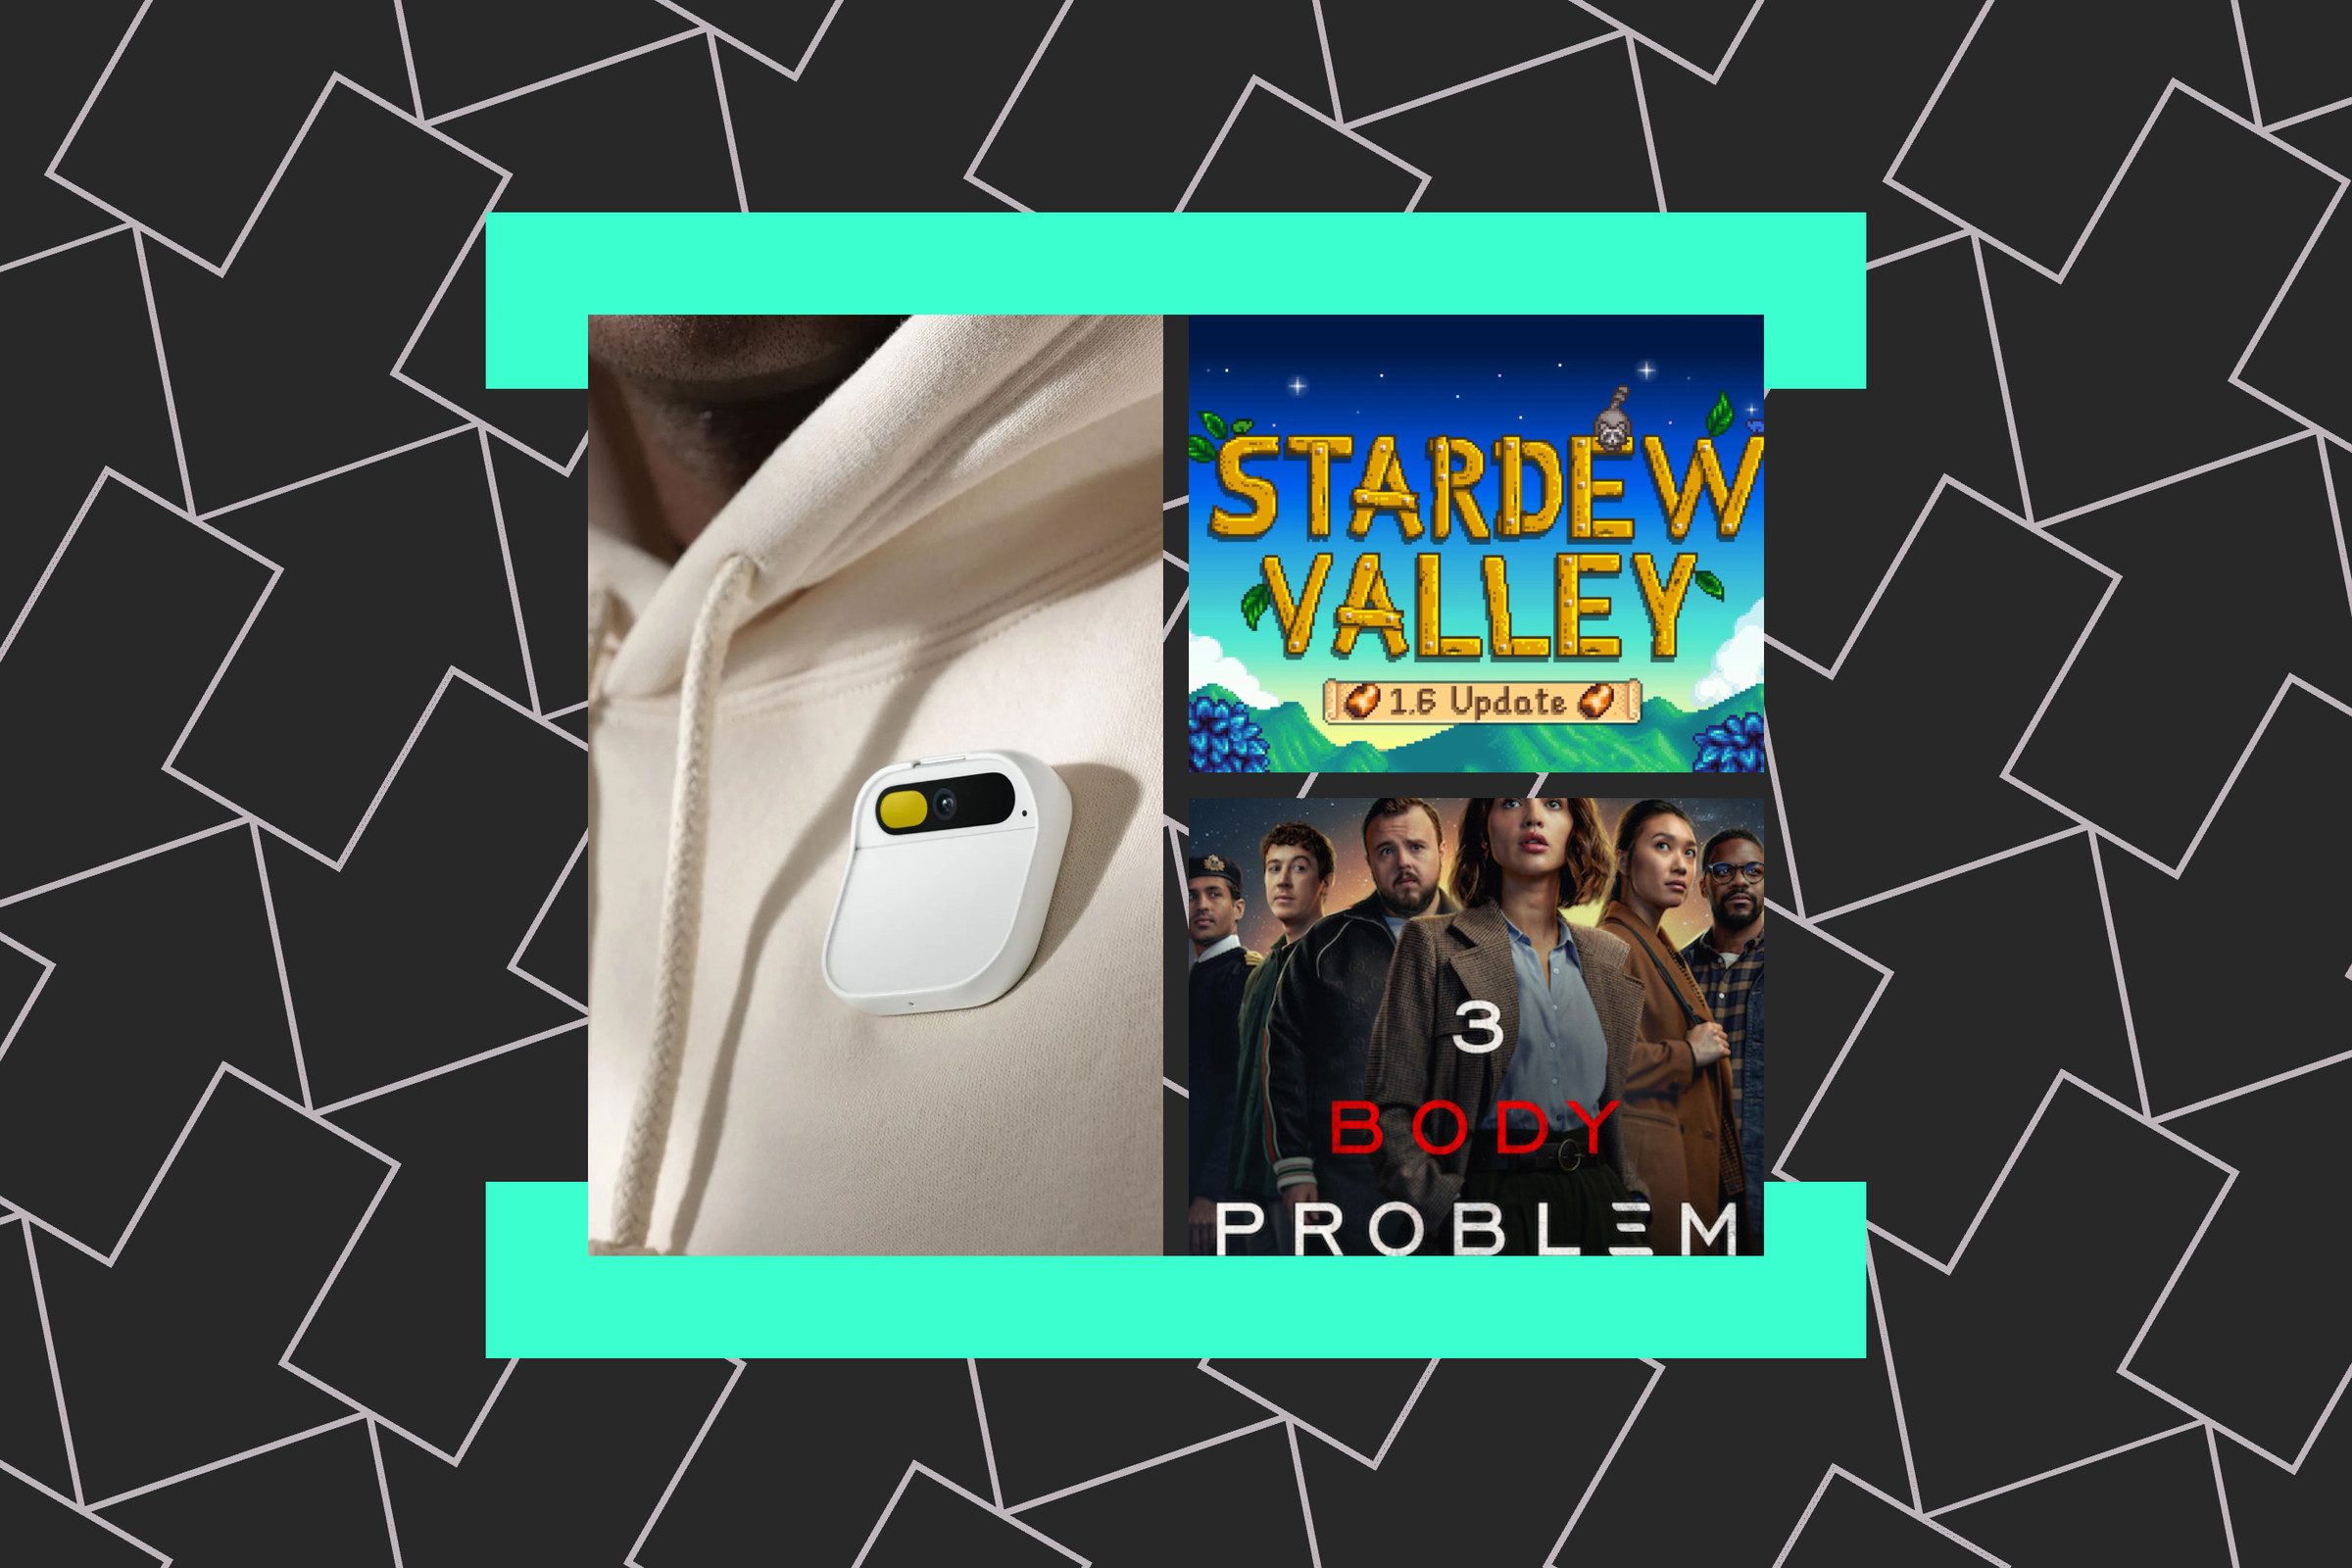 An illustration of the Humane AI Pin, Stardew Valley, and the 3 Body Problem.